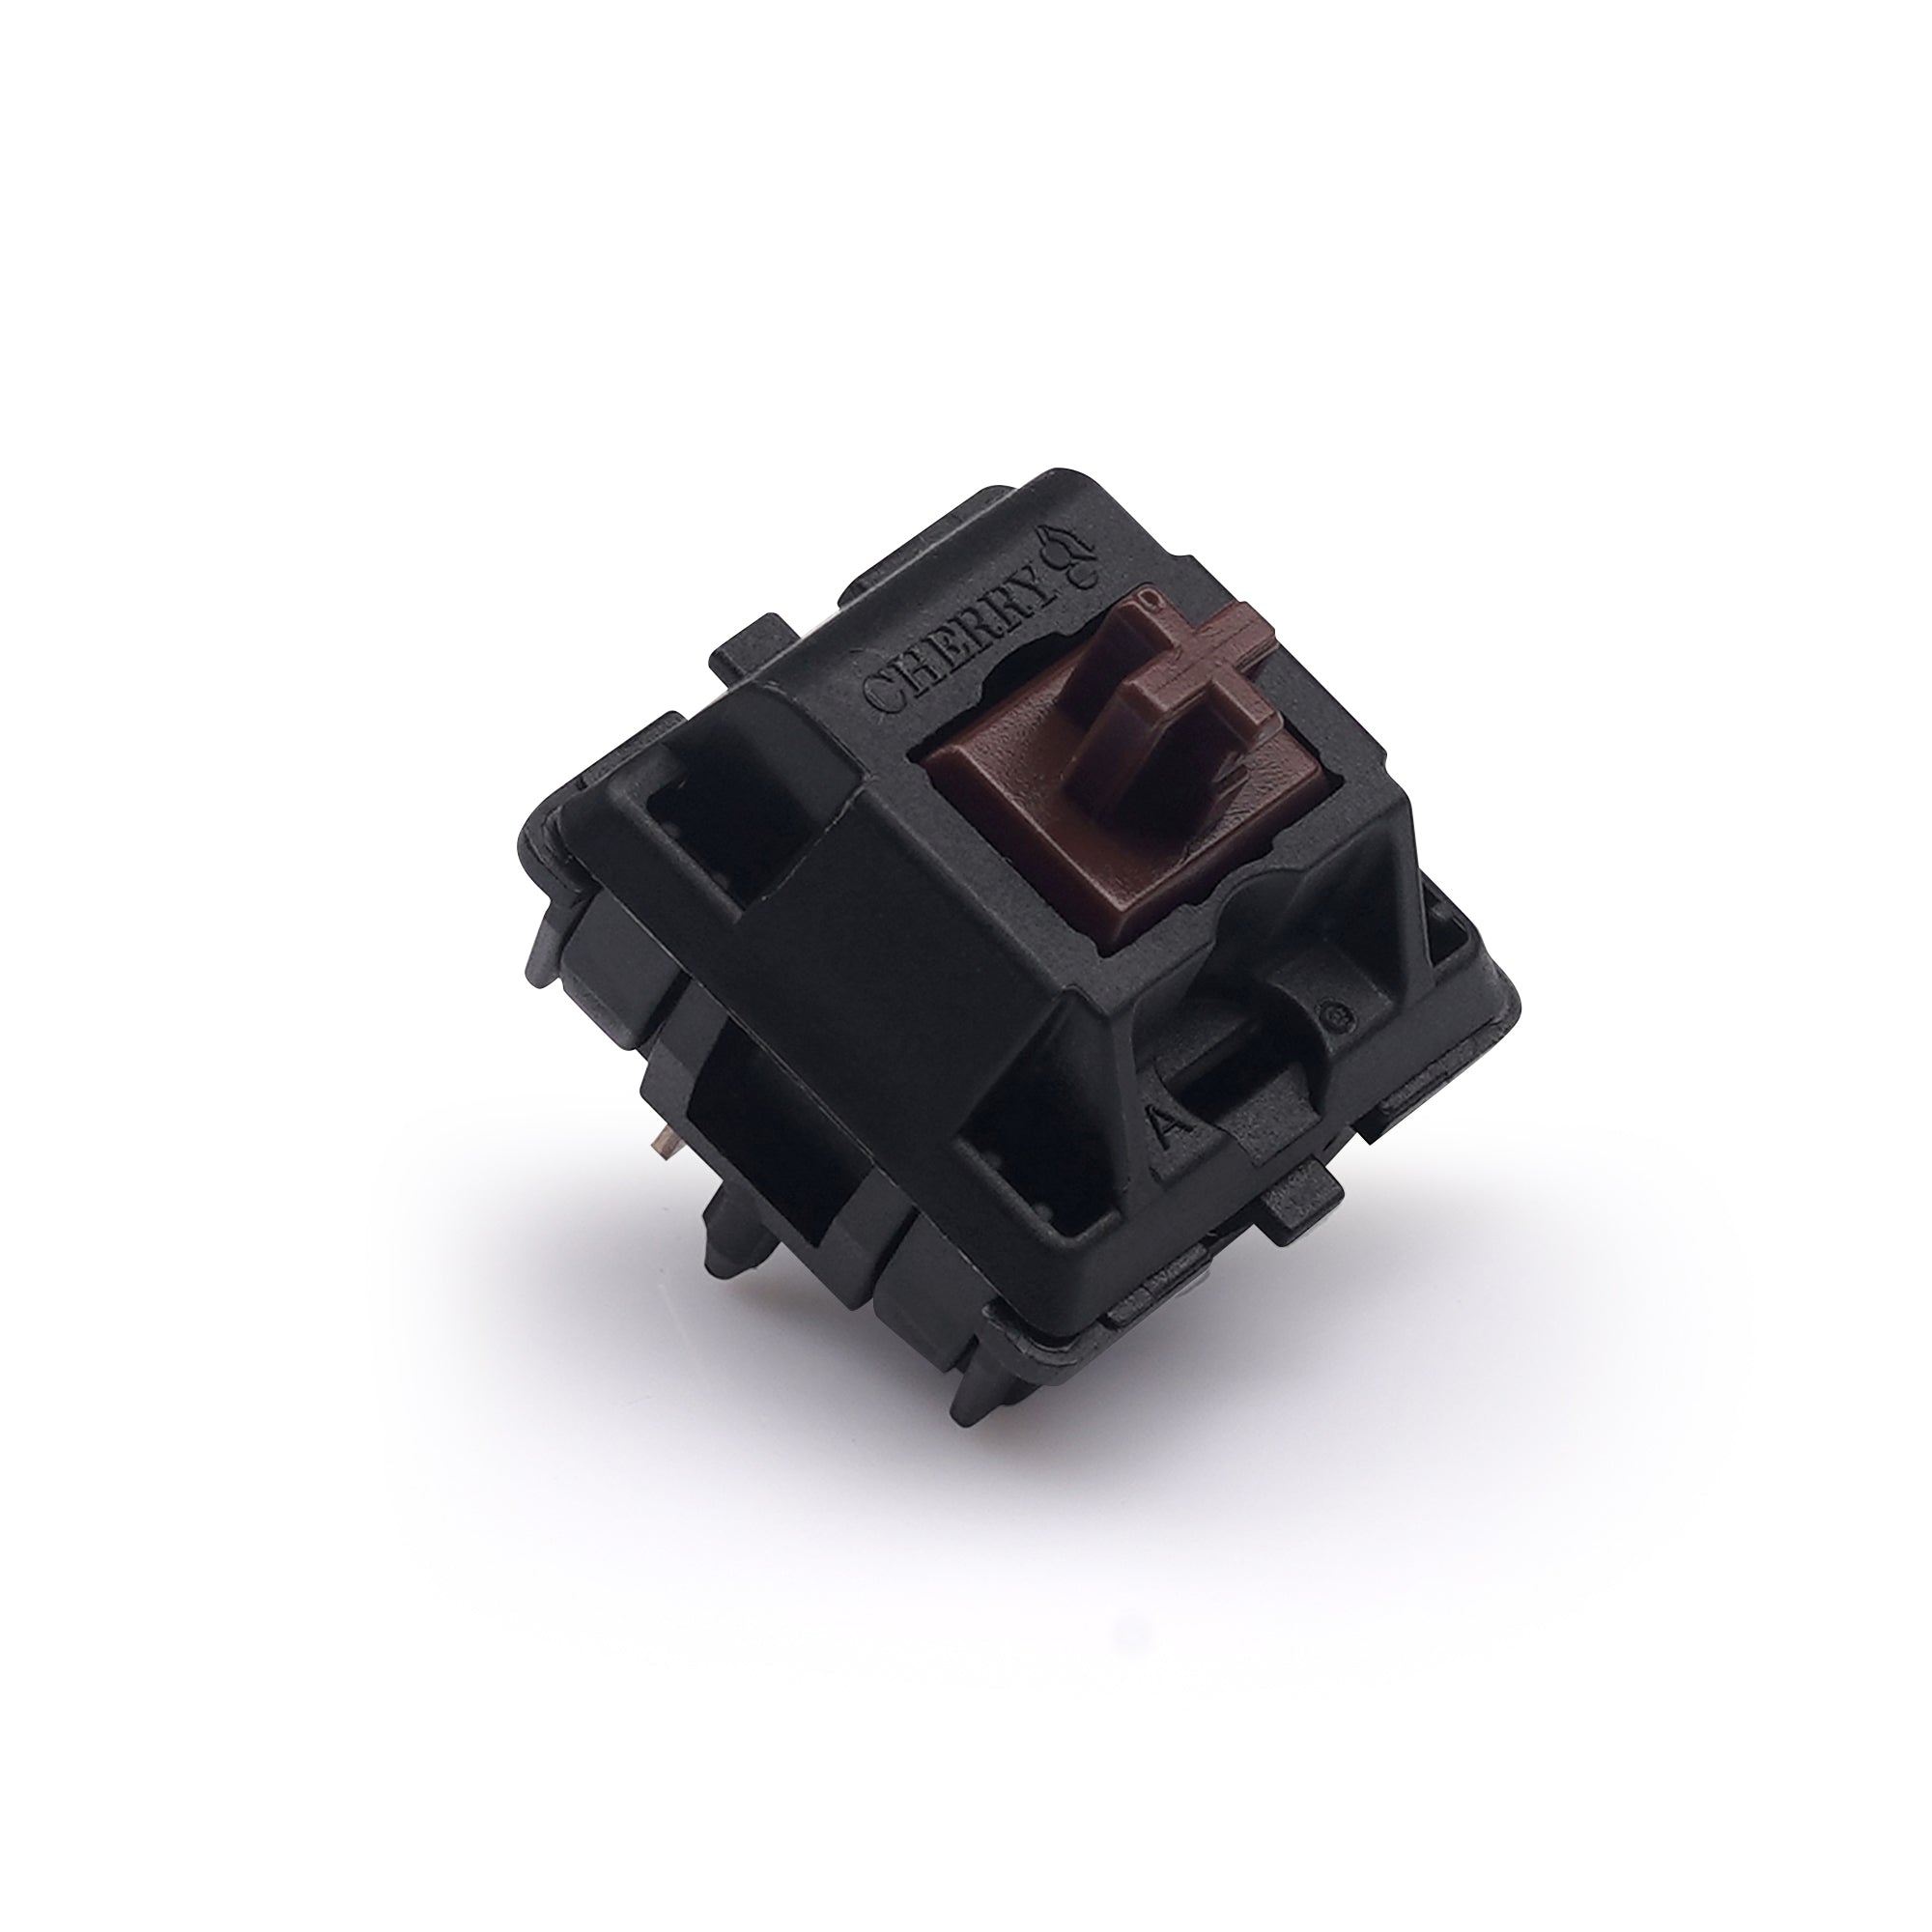 Cherry Hyperglide Tactile Switches KBDfans® Mechanical Keyboards